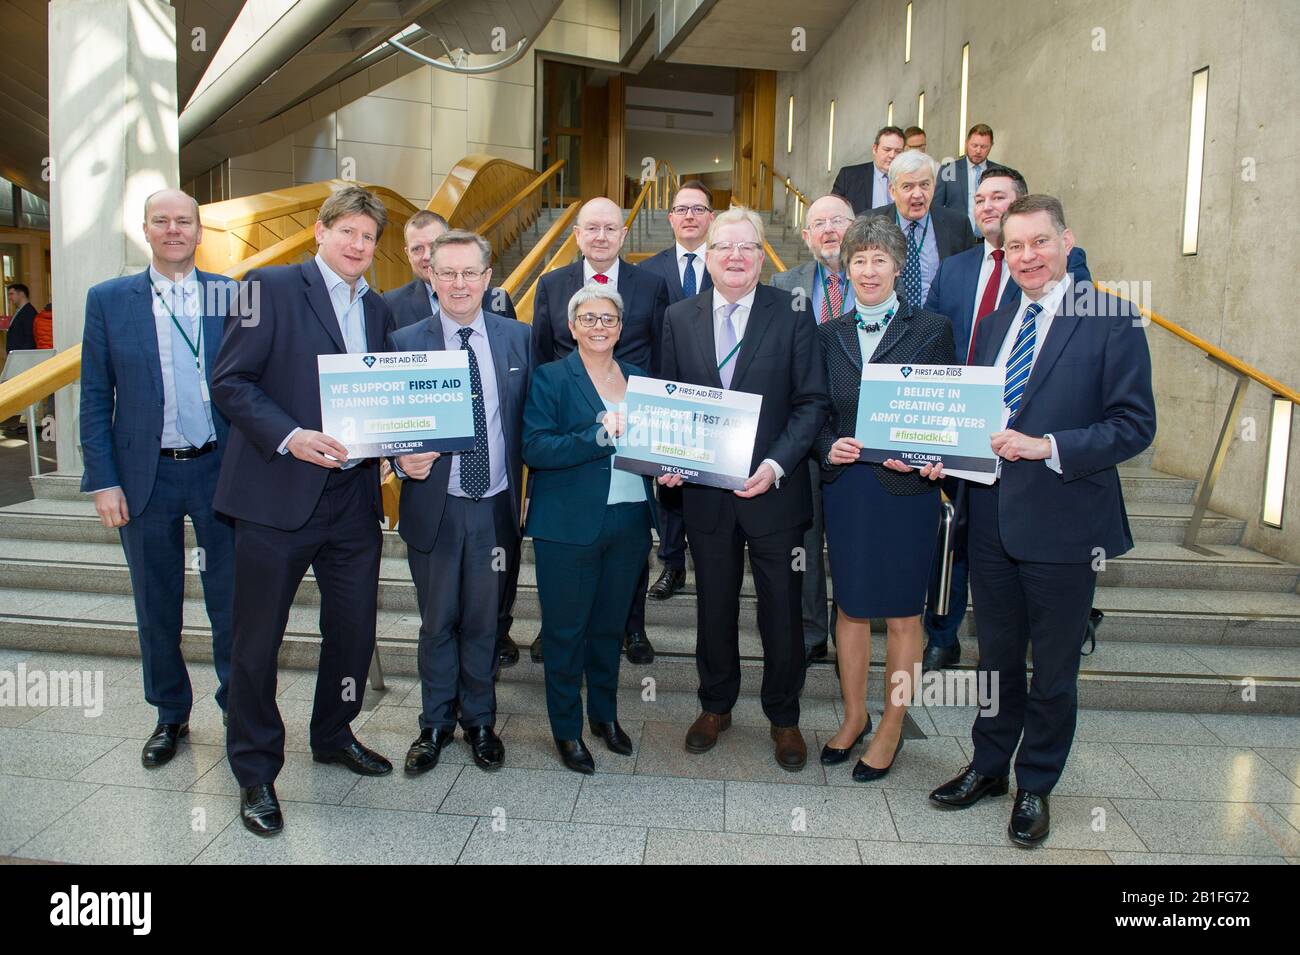 Edinburgh, UK. 25th Feb, 2020. Pictured: (centre) Jackson Carlaw MSP - Leader of the Scottish Conservative and Unionist Party, along with fellow party members. A photo call in the Scottish Parliament for supporting first aid training in schools for kids. Credit: Colin Fisher/Alamy Live News Stock Photo